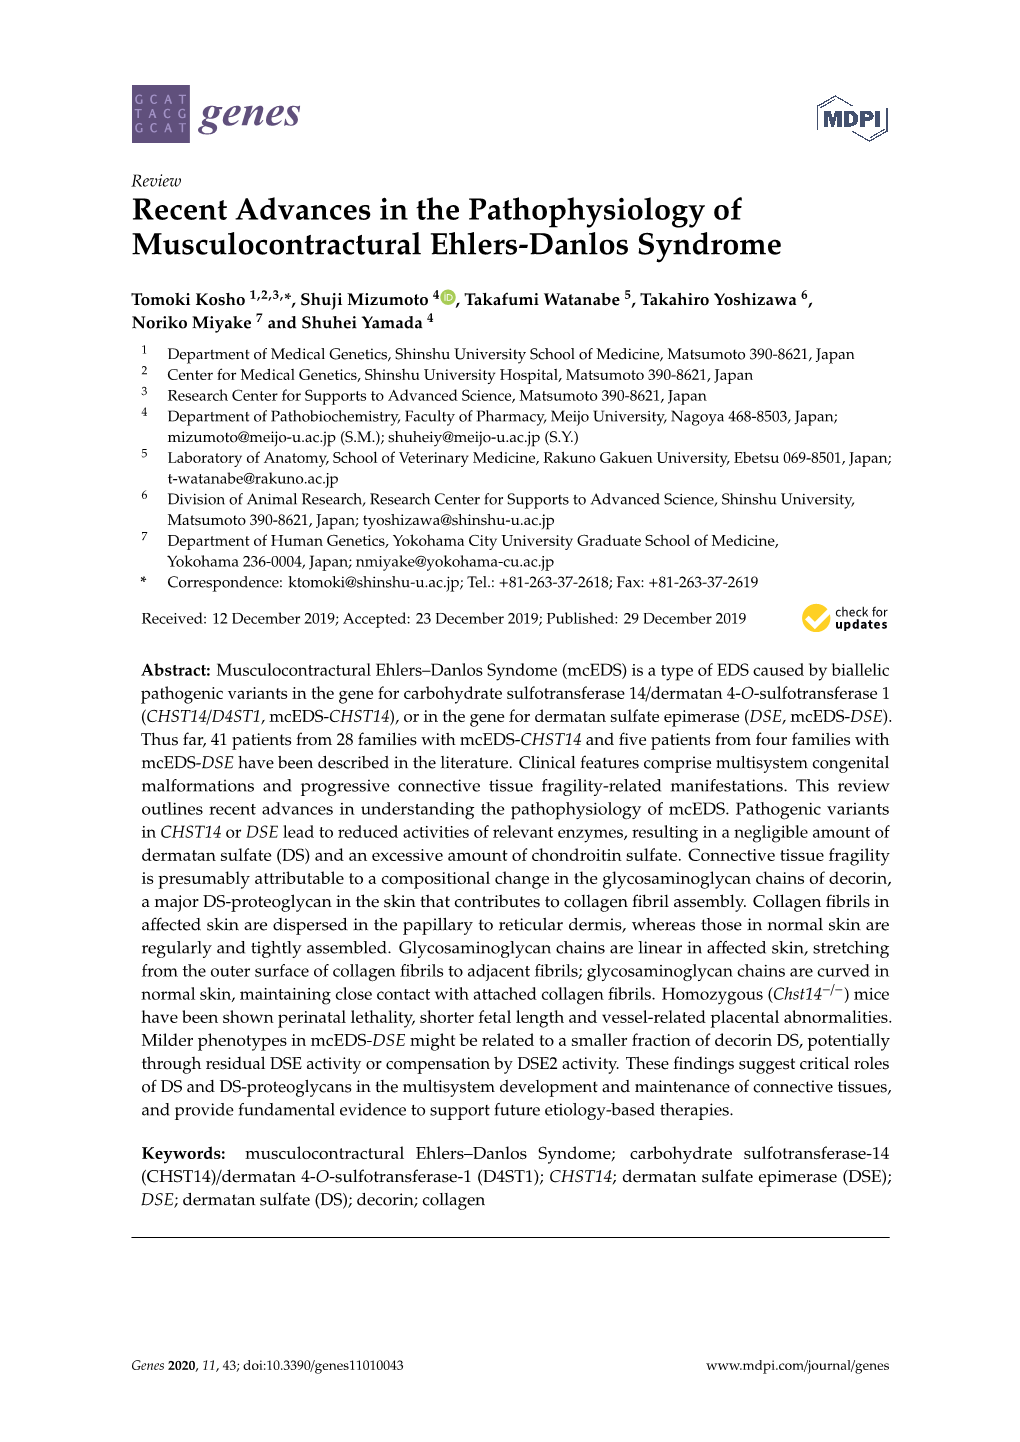 Recent Advances in the Pathophysiology of Musculocontractural Ehlers-Danlos Syndrome